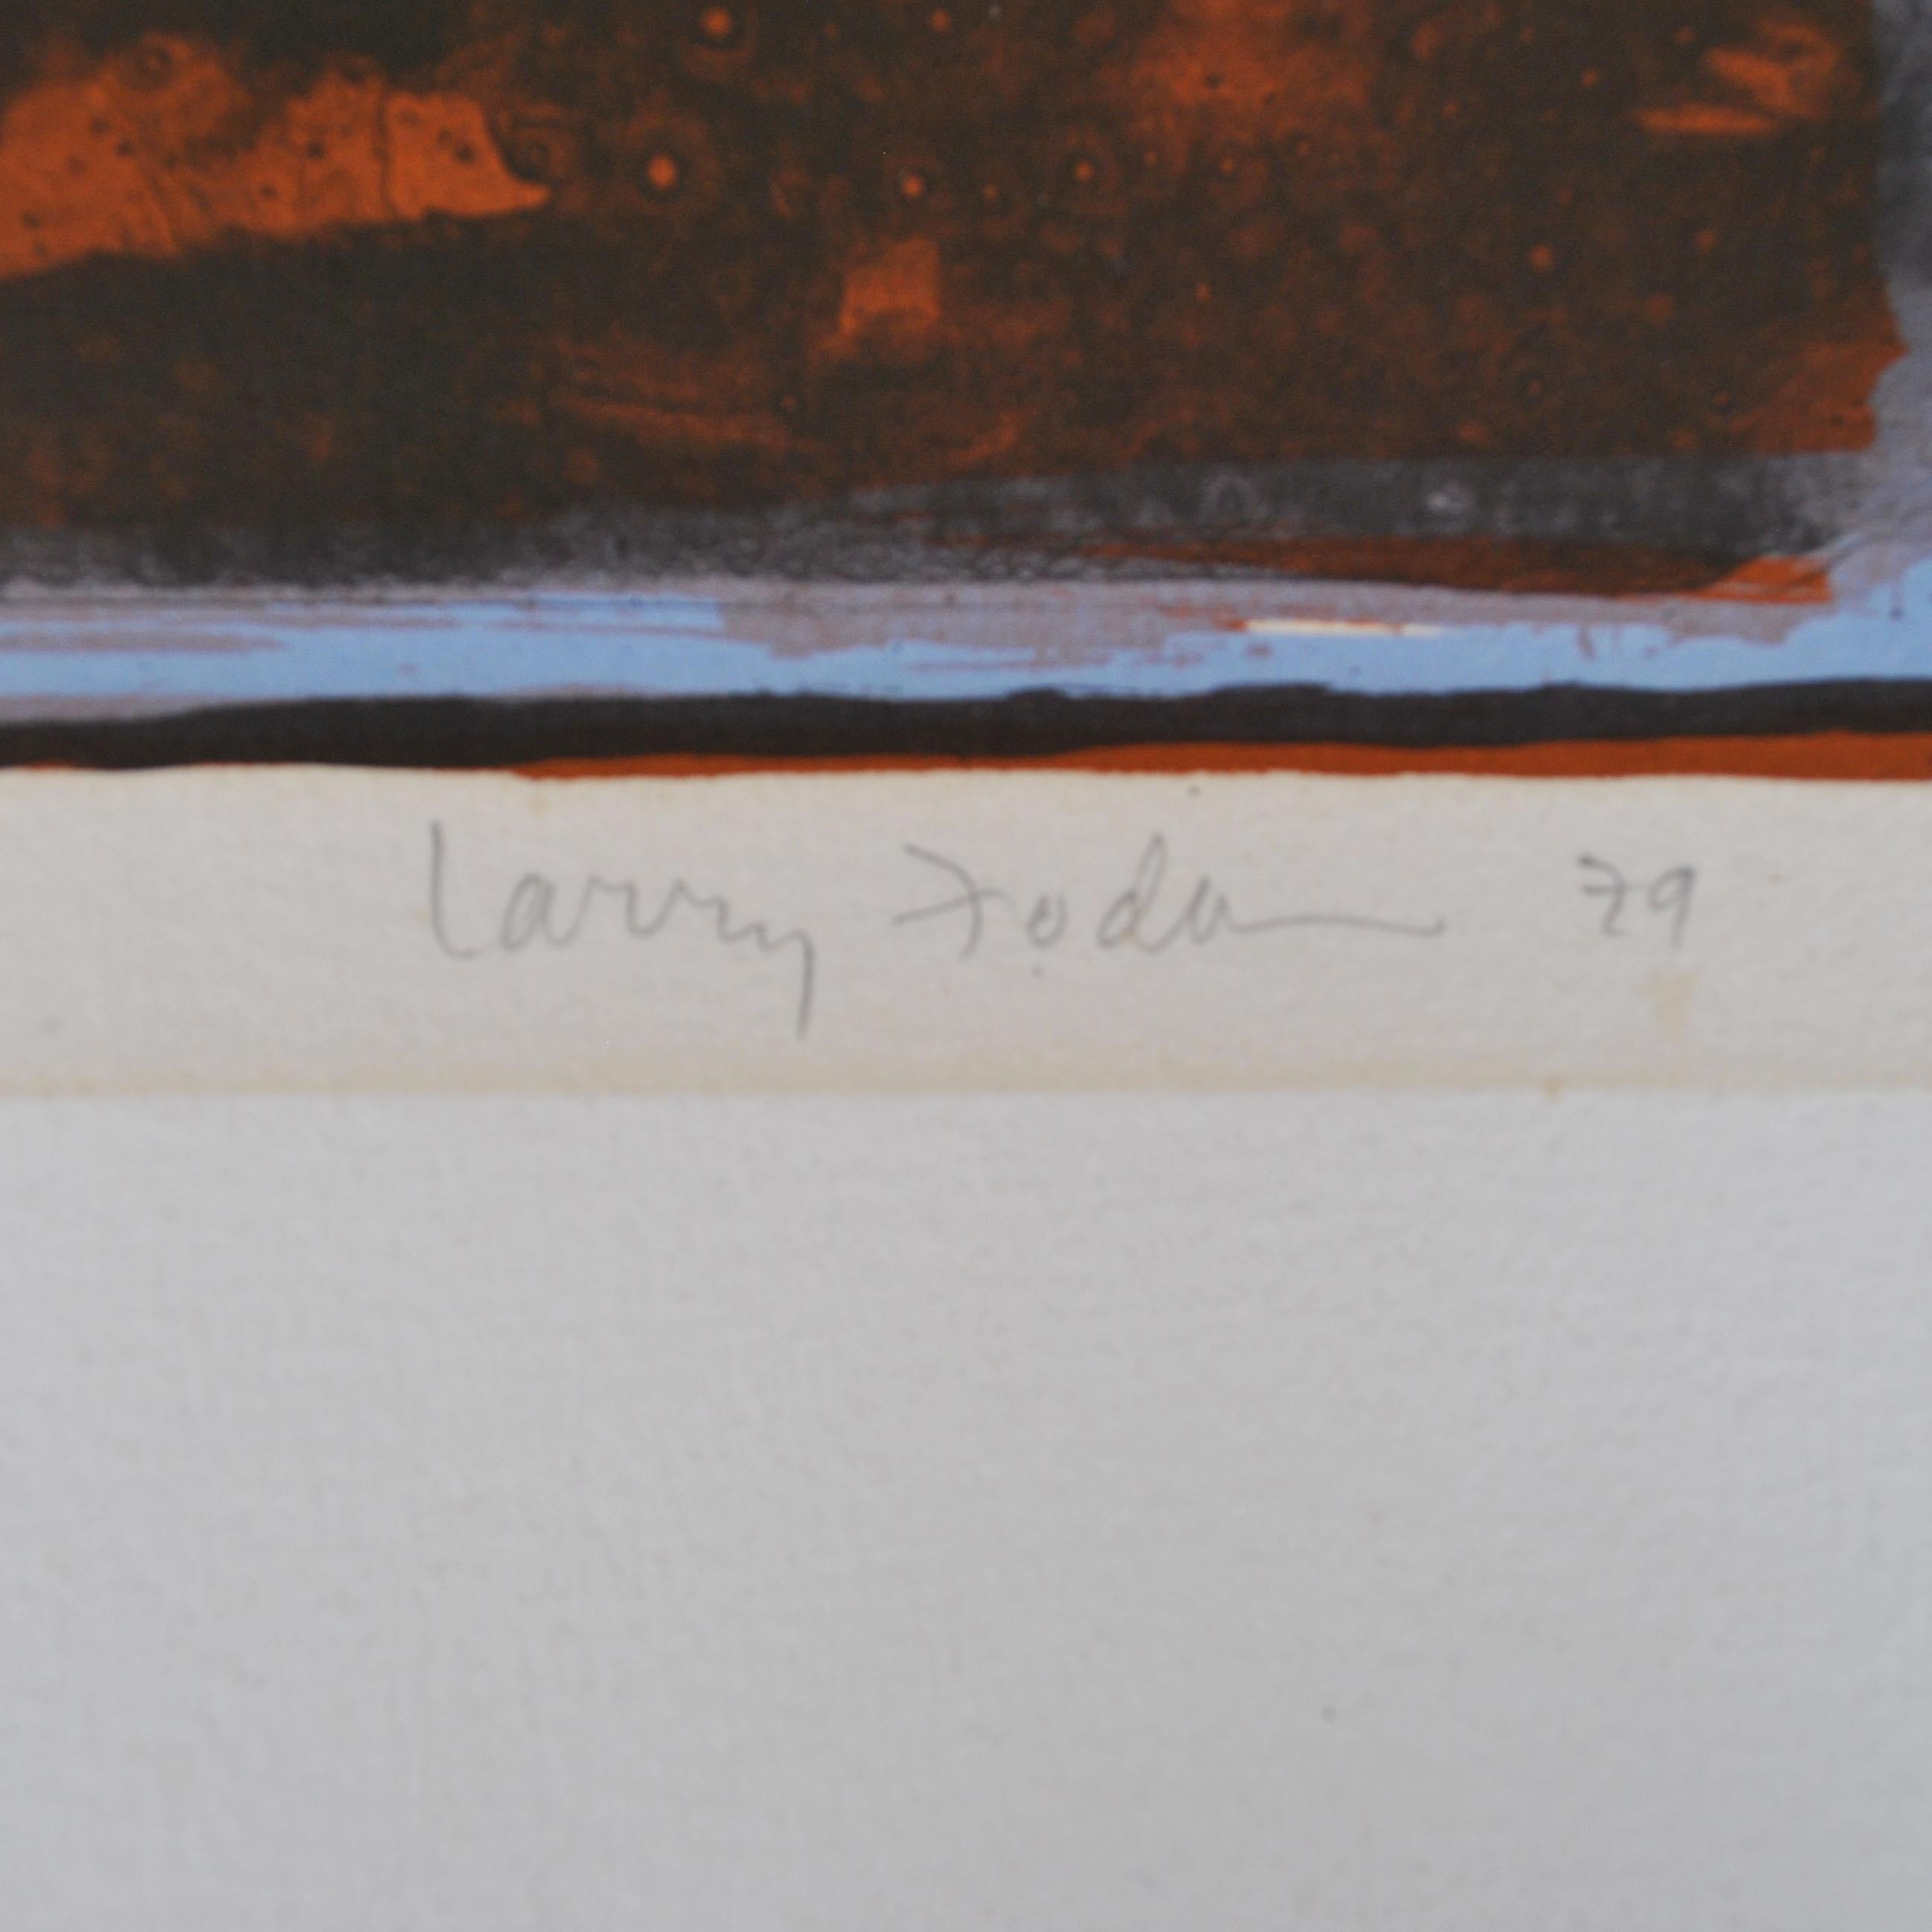 Modern Larry Fodor Buffalo State 1 Signed and Numbered Lithograph, 1979 'MR12311'